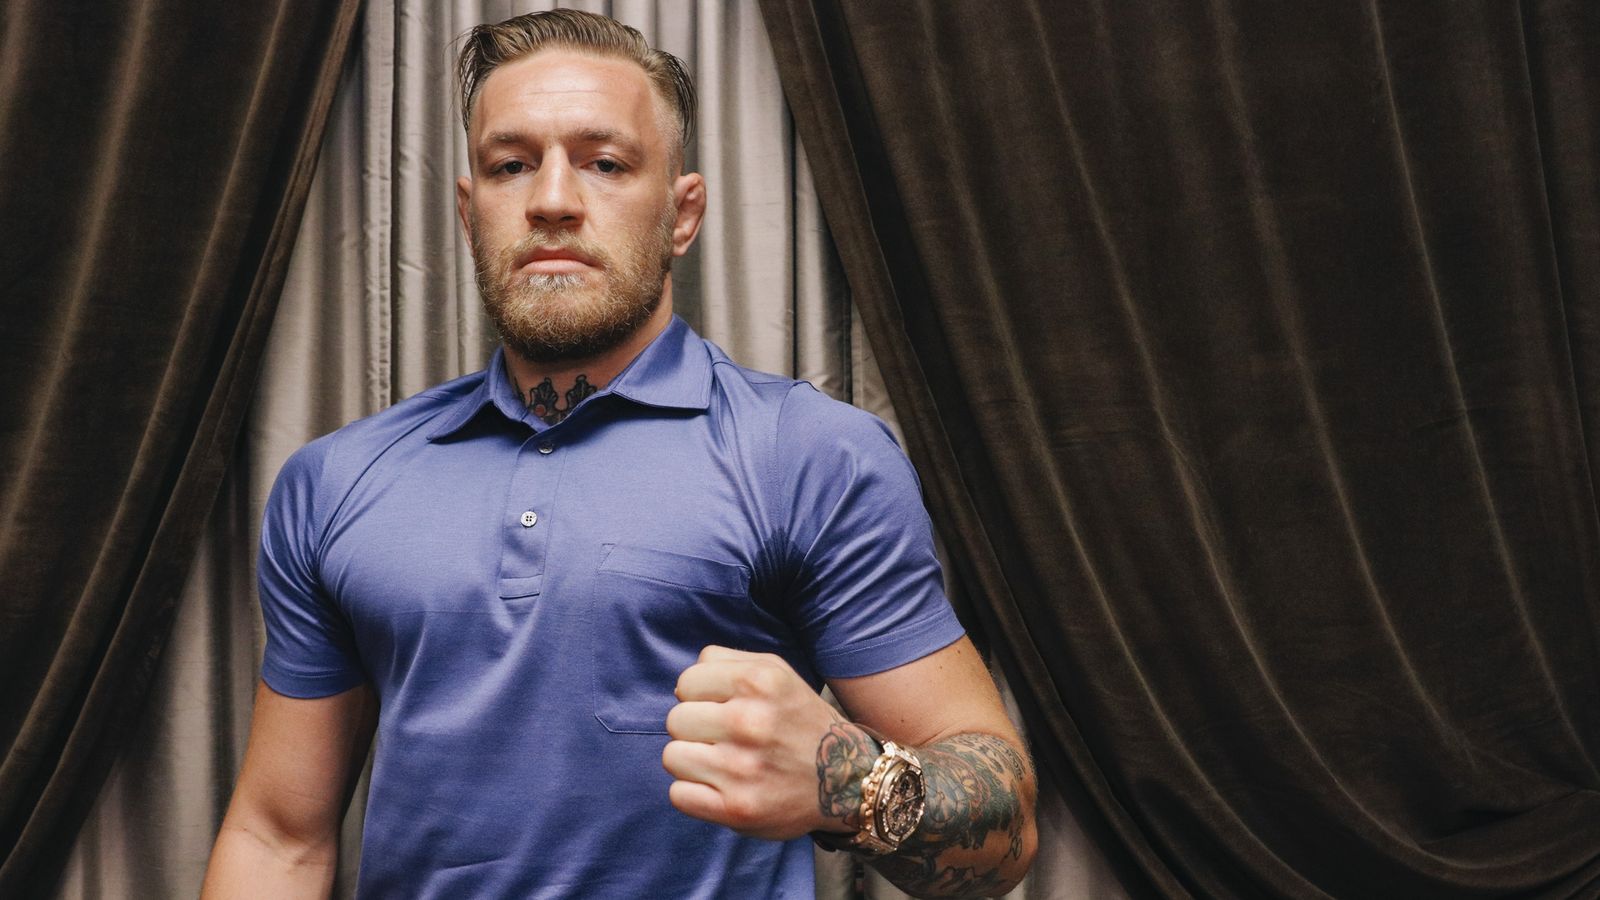 Conor McGregor HD Wallpapers Free Download in High Quality and Resolution